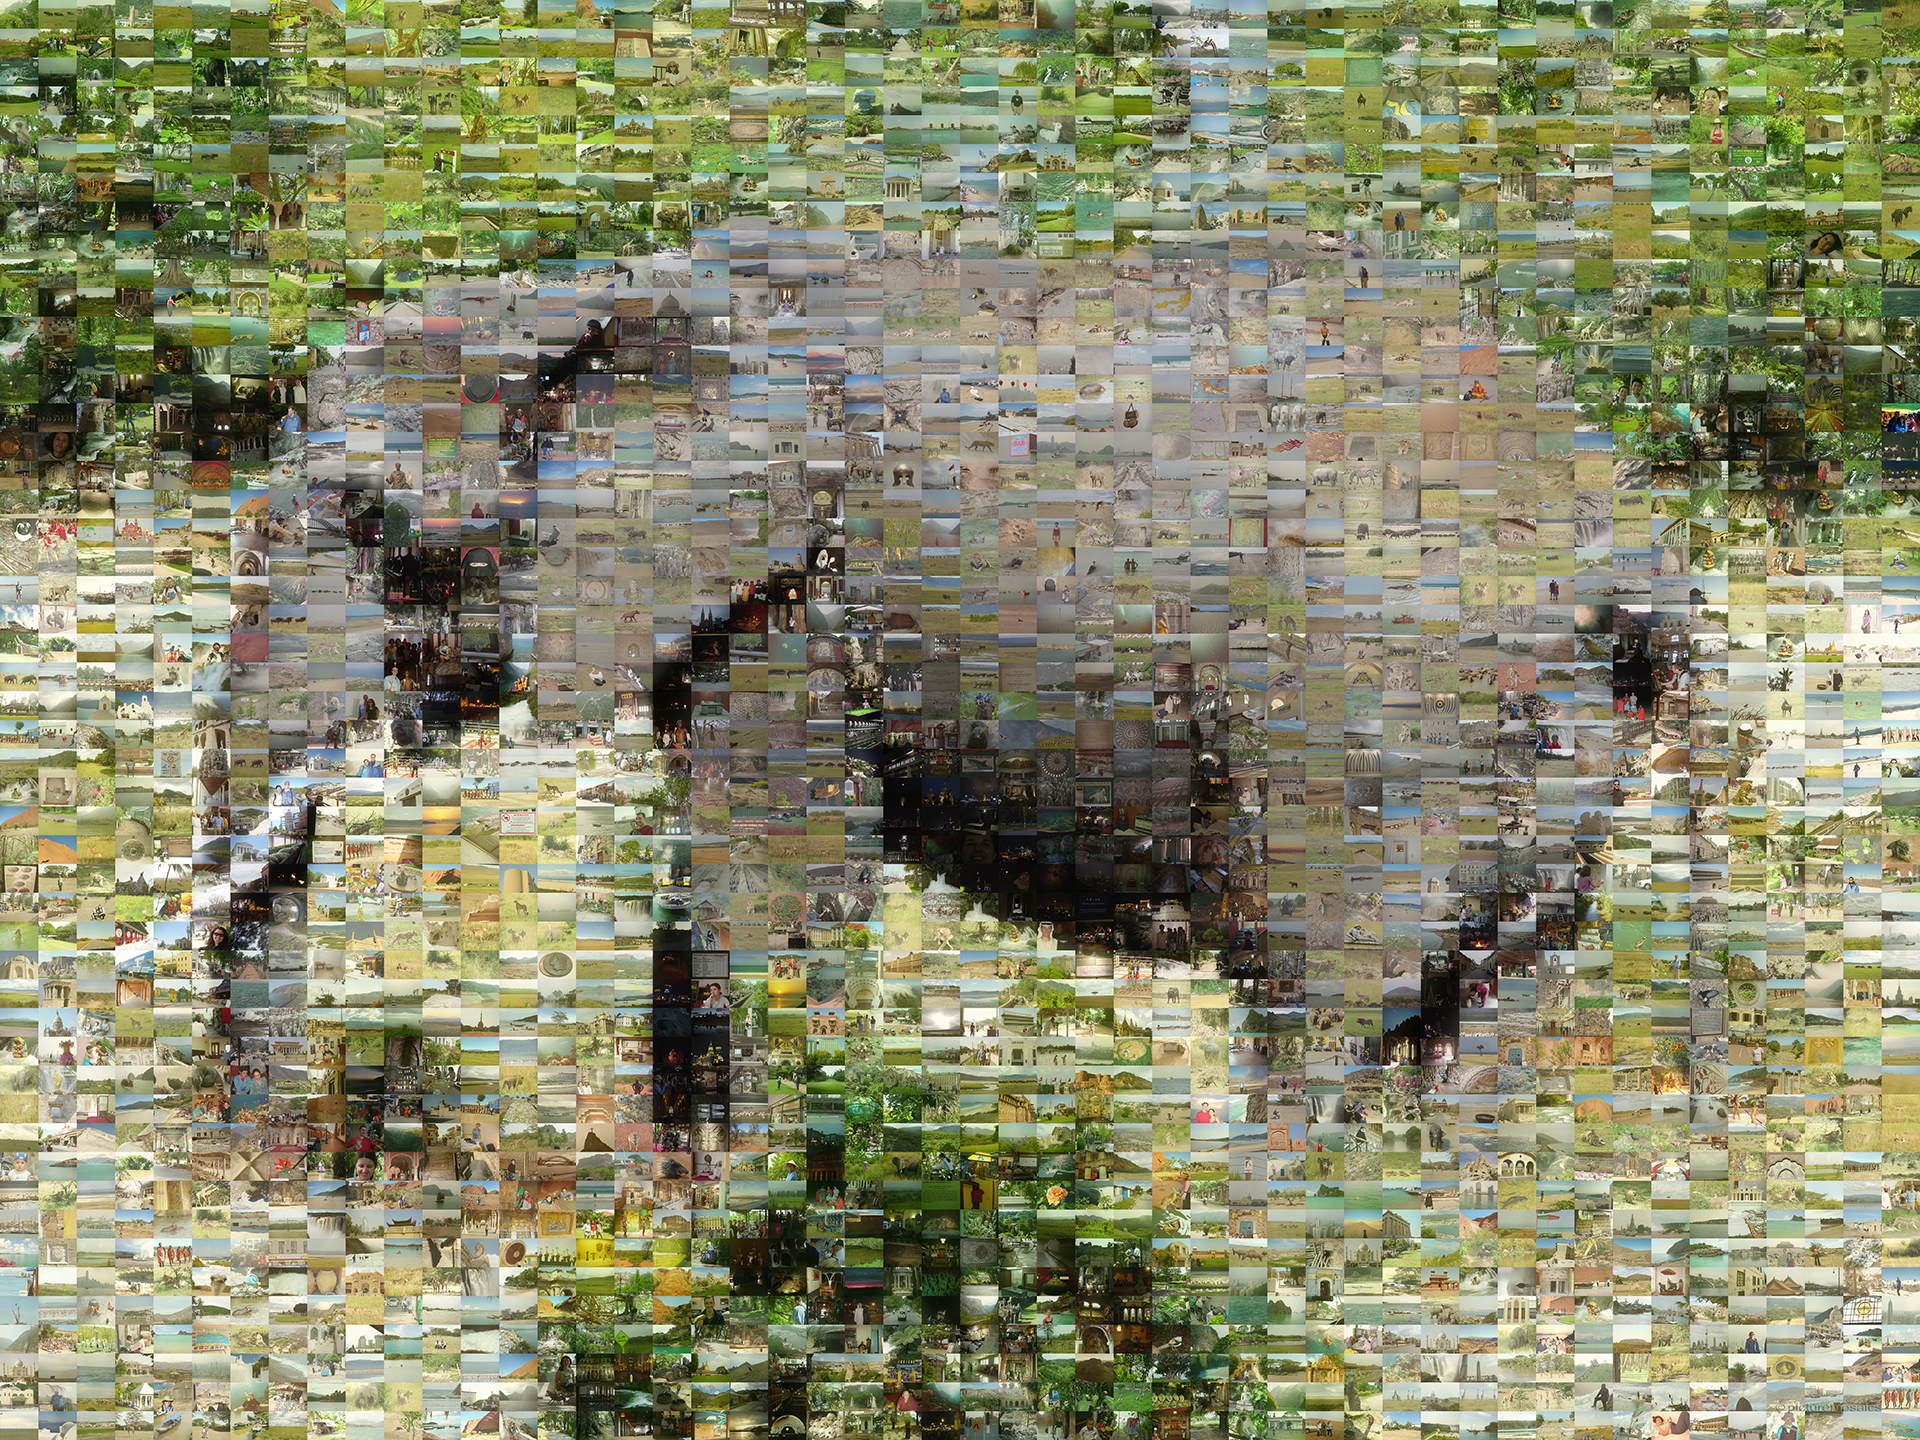 photo mosaic an image of an elephant using 2500 unique photos